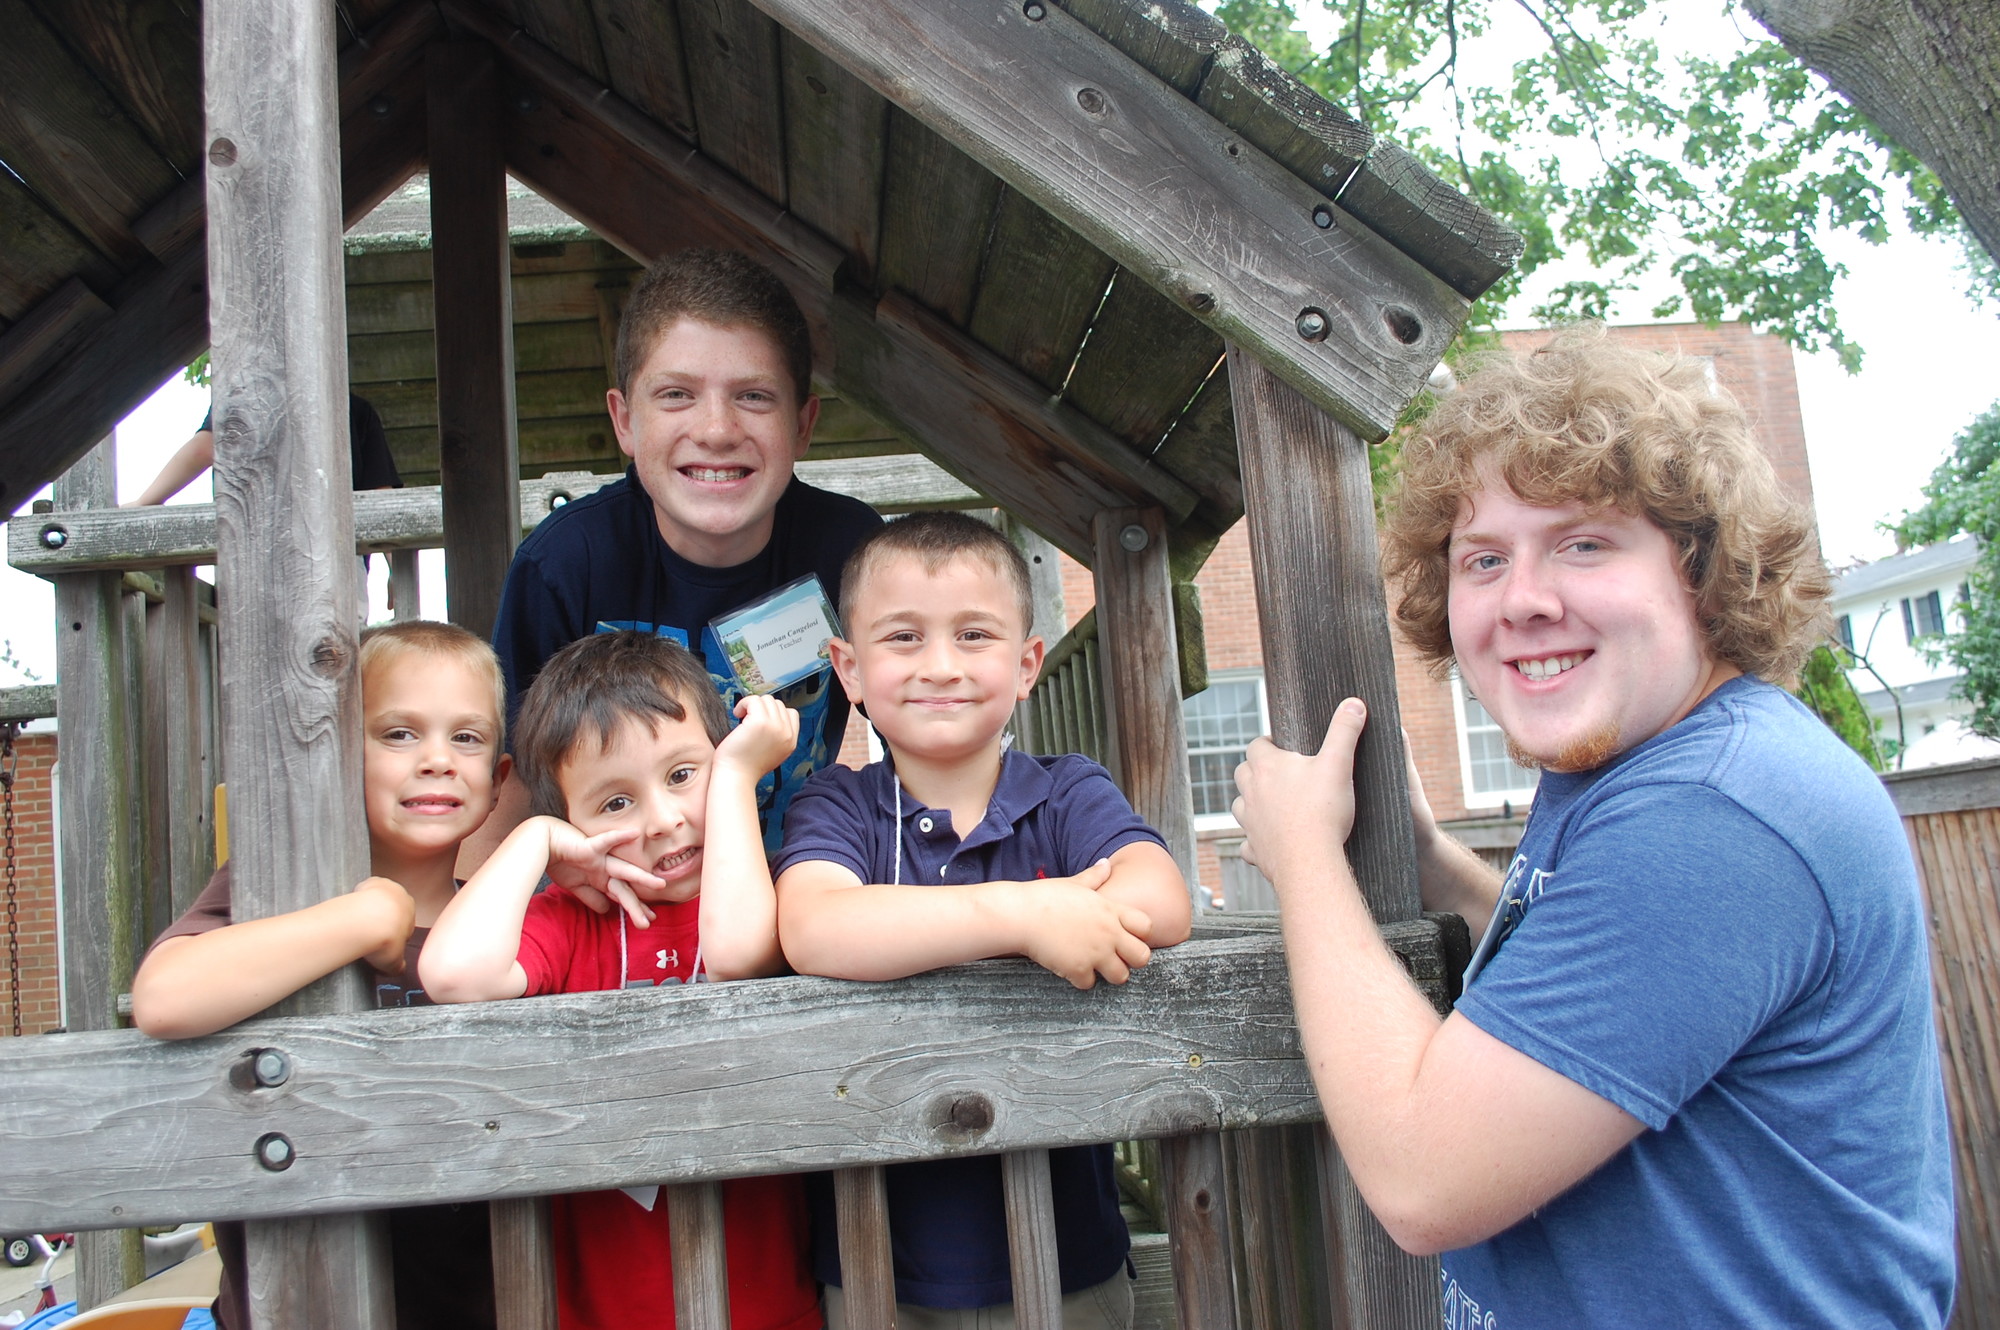 Brothers Jonathan and Anthony Cangelosi were volunteers, working with children ages 4-6 at Christ Lutheran Church’s annual vacation Bible school.